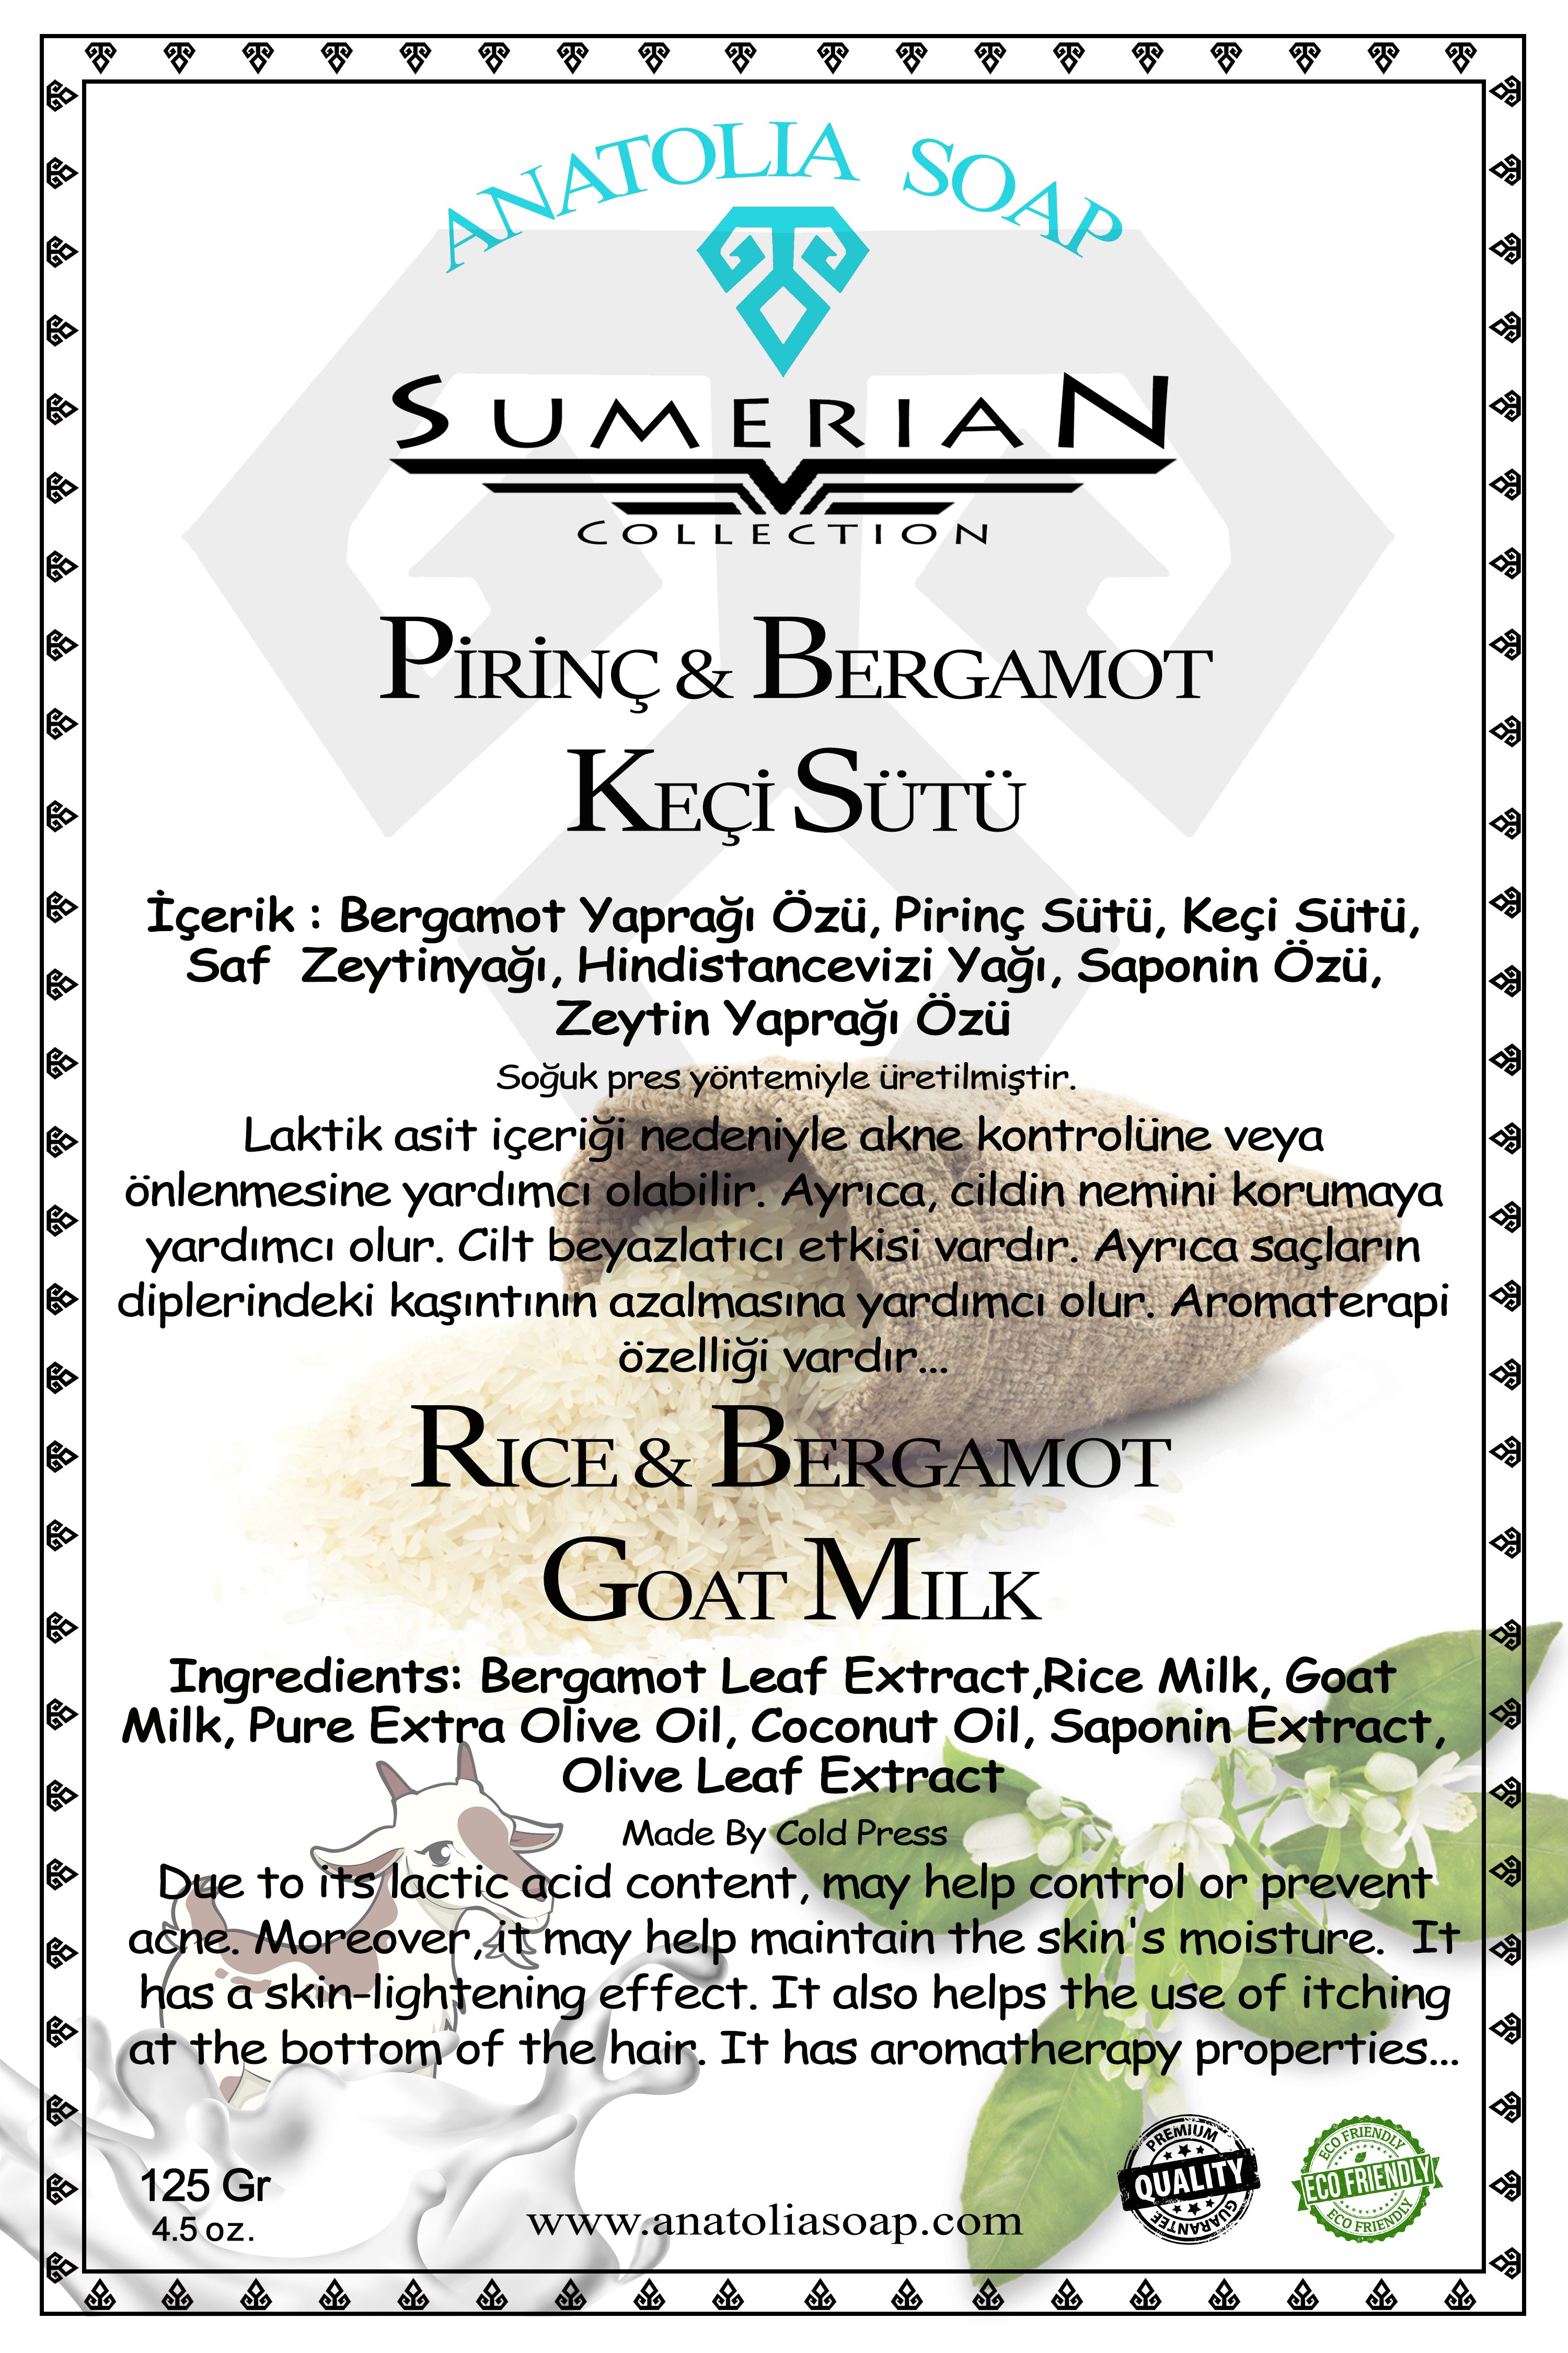 Whiten and Smooth Your Skin with Sumerian Collection Rice Goat Milk Bergamot Soap.